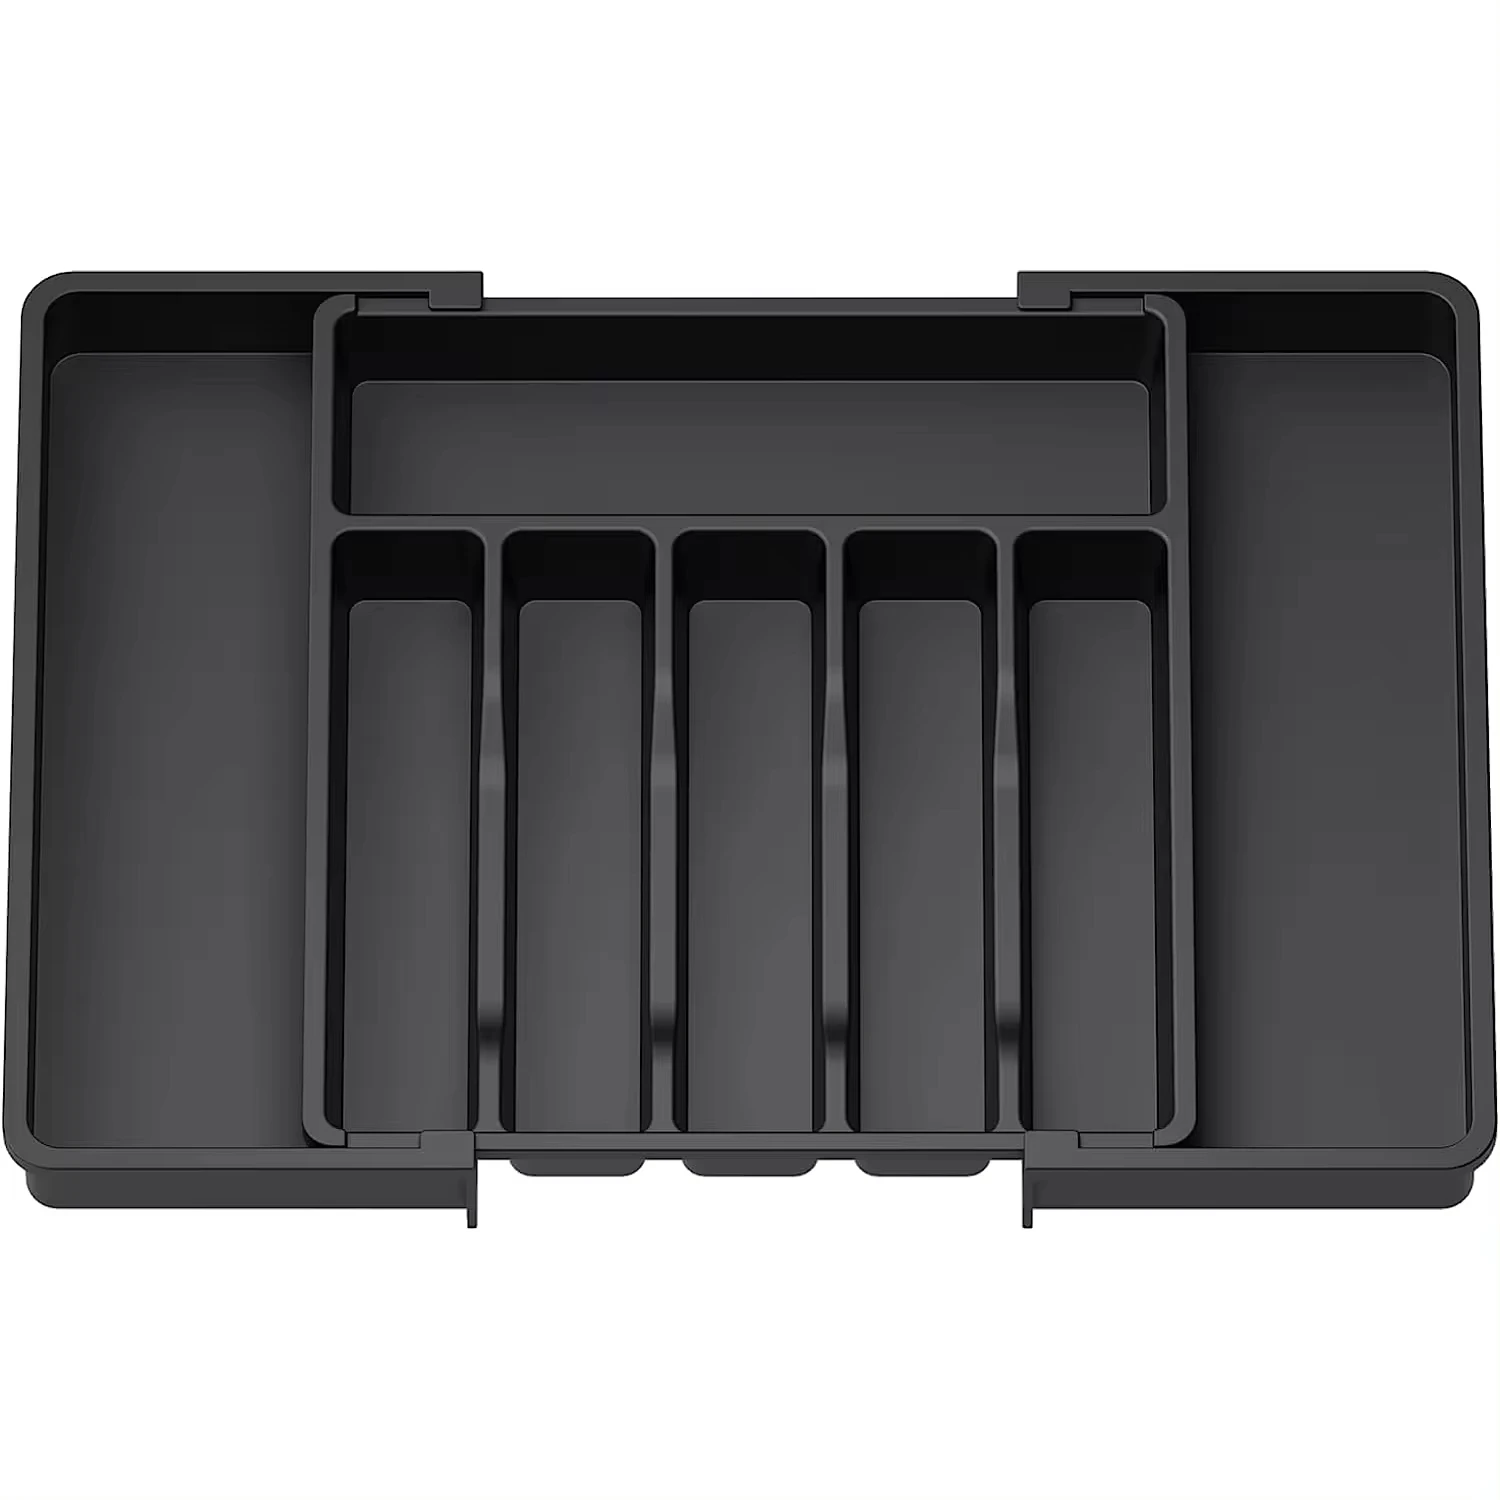 Hot Selling New Kitchen Products Plastic Adjustable Expandable Cutlery Drawer Divider Organizer Cutlery Tray Flatware Organizer